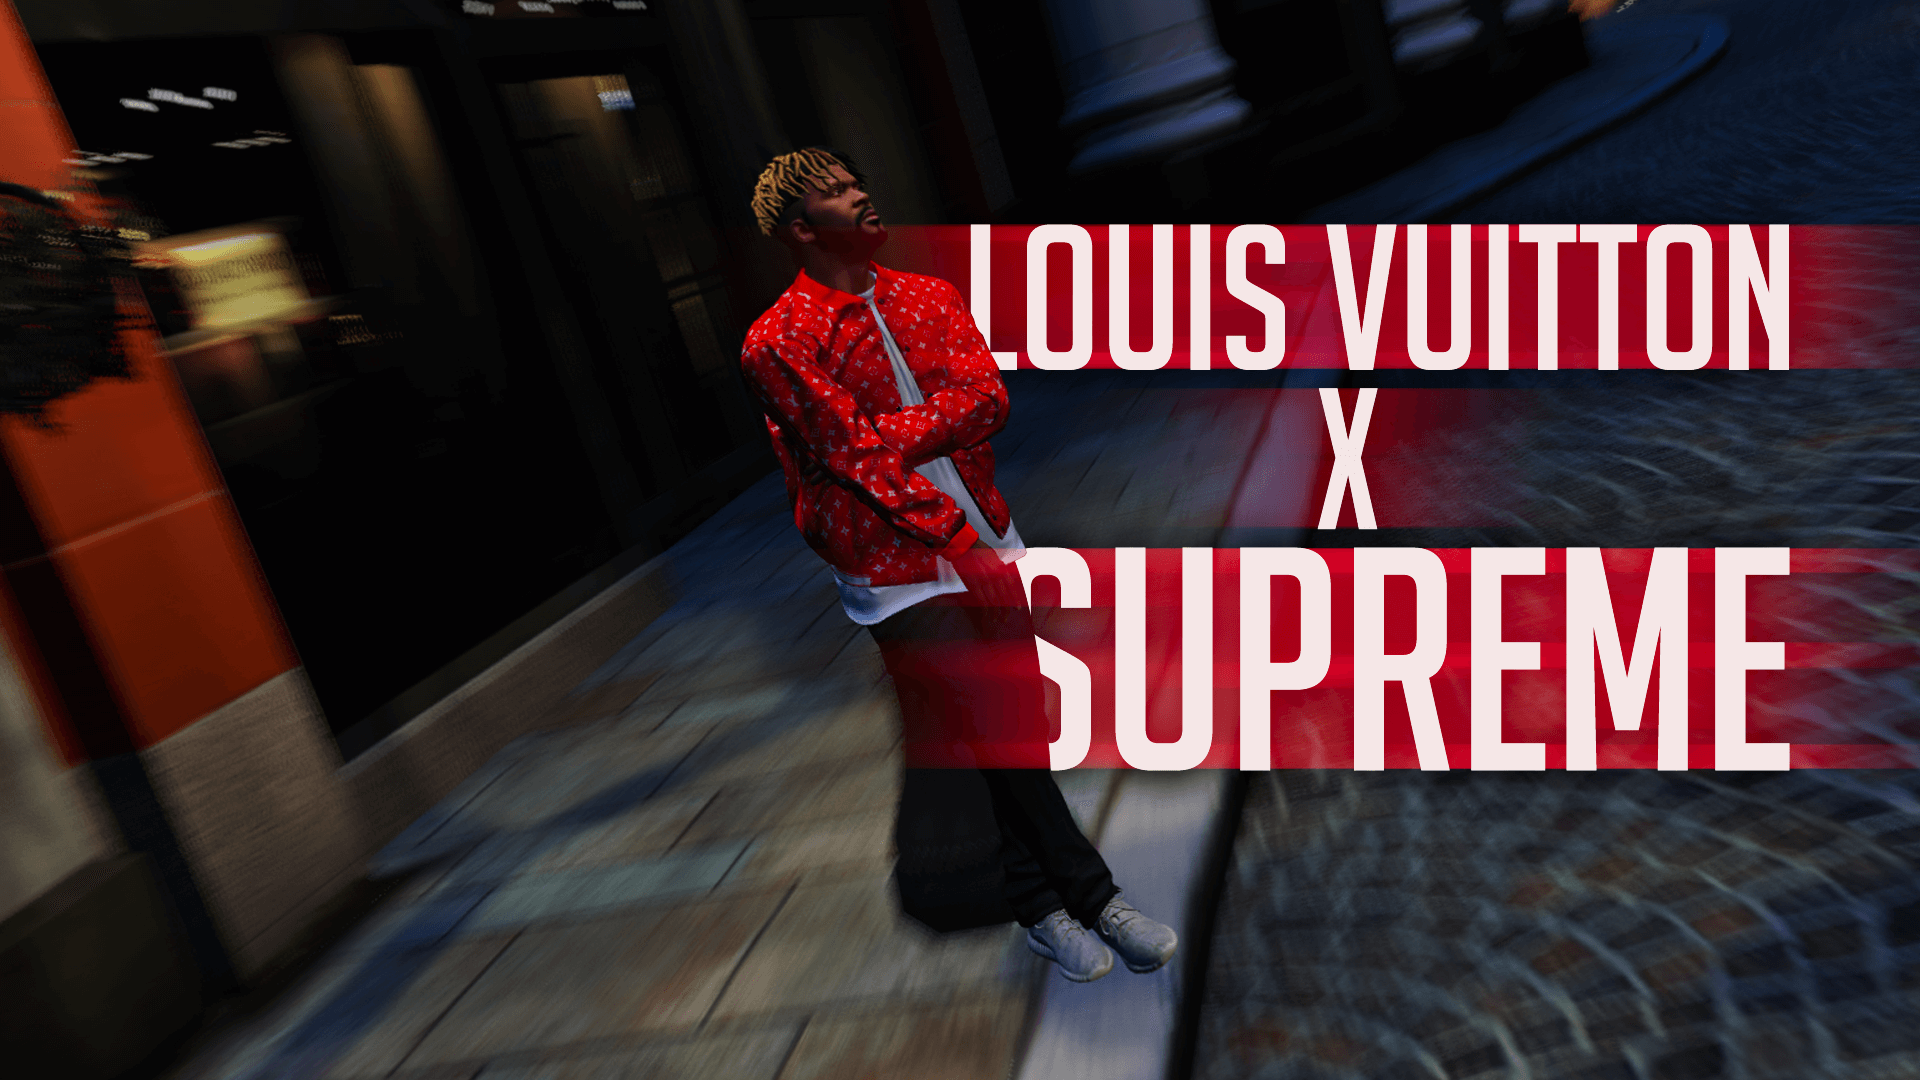 The new GTAOnline update has some fire jawnz Louboutin and Louis Vuitton  parodies  rstreetwear